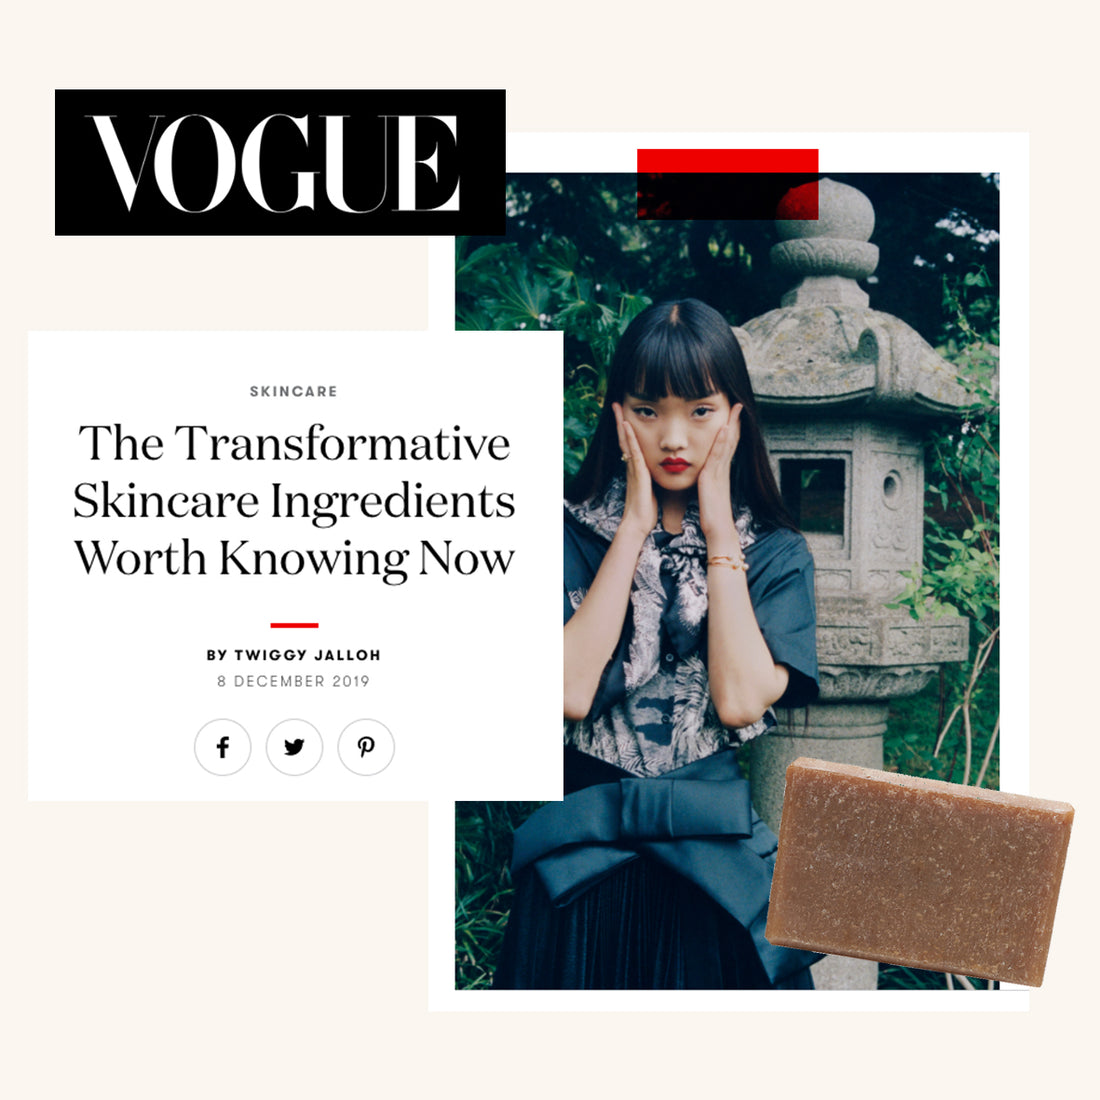 VOGUE: The Transformative Skincare Ingredients Worth Knowing Now